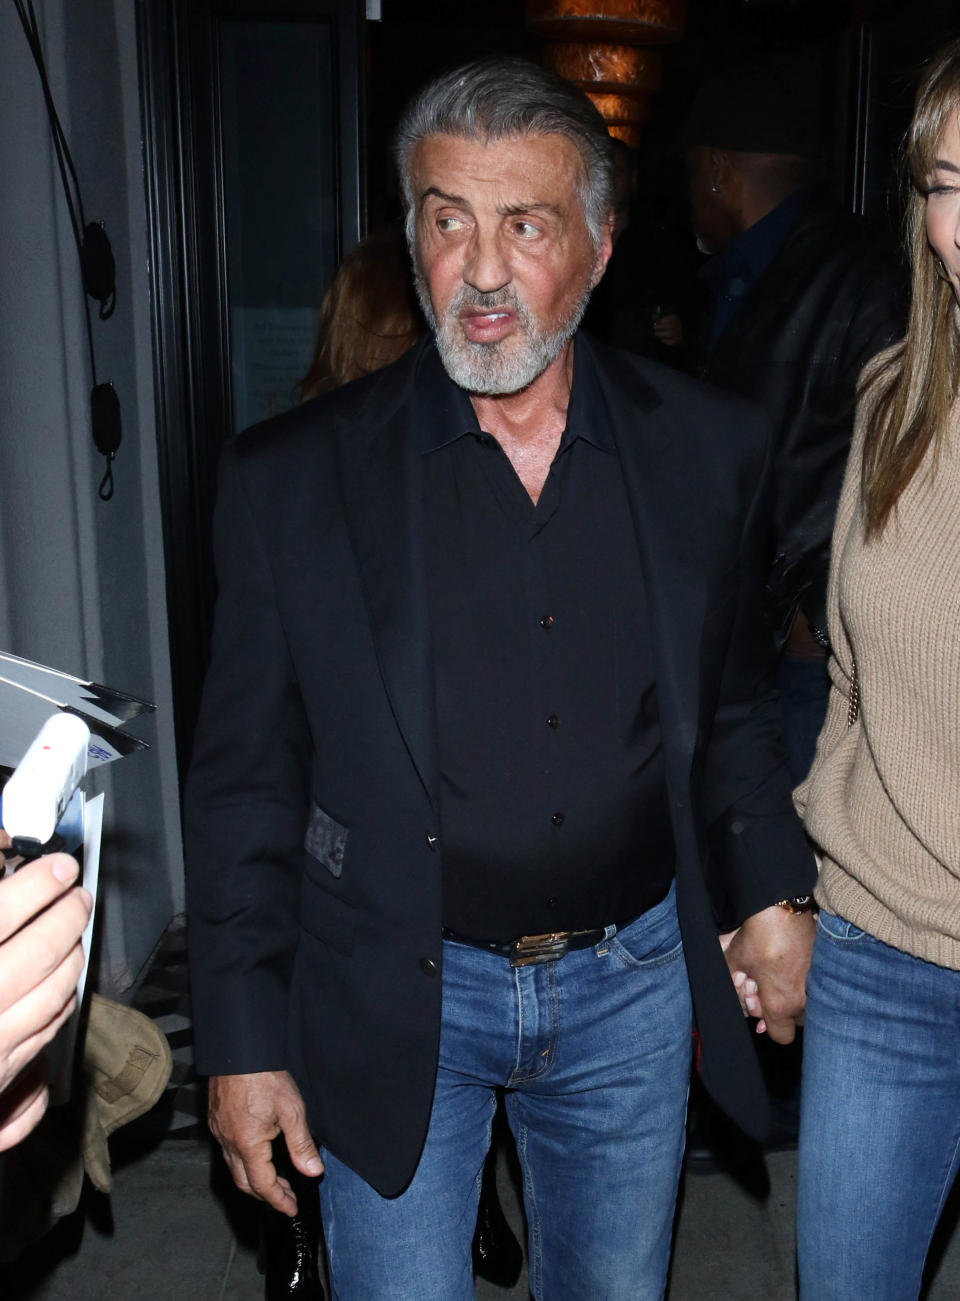 Sylvester Stallone is seen on January 29, 2020 in Los Angeles, California. [Photo: Getty]